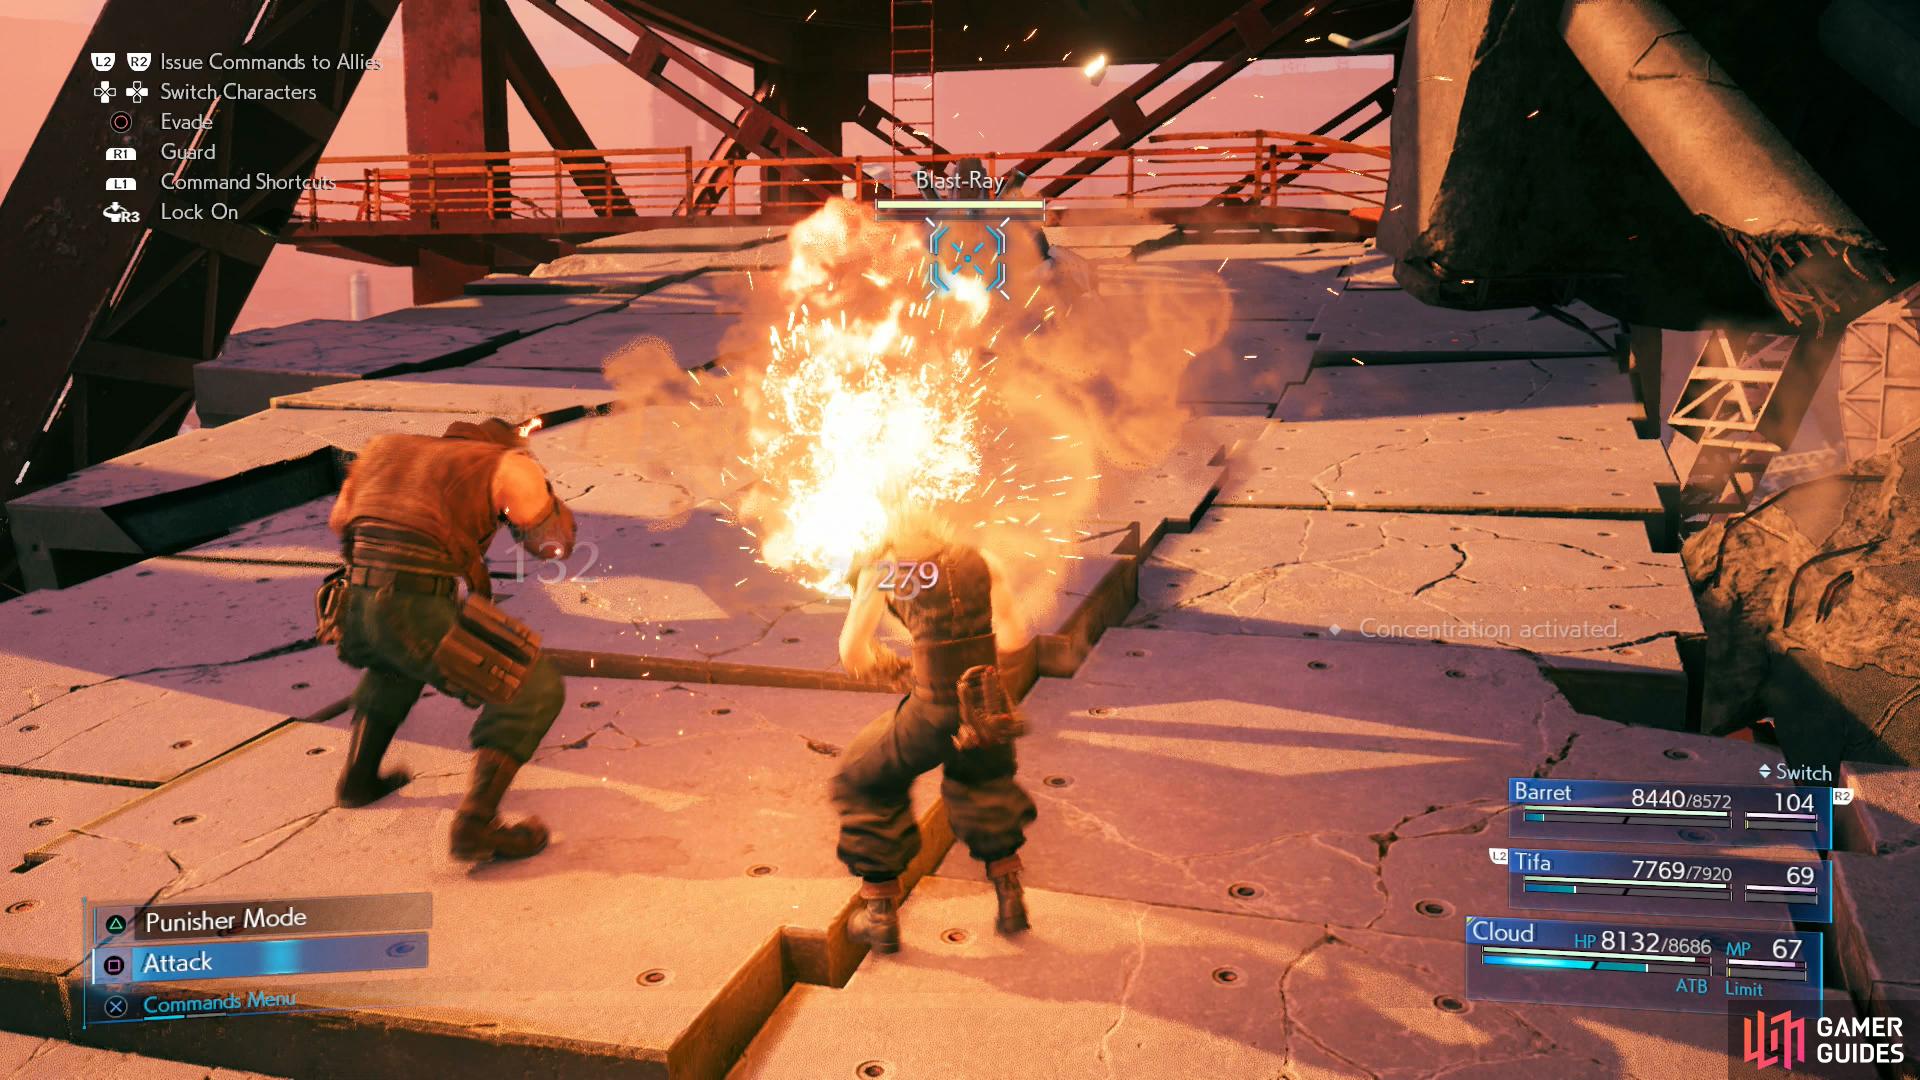 Blast-Rays will use Concentrated Fire to bombard targets with grenades.